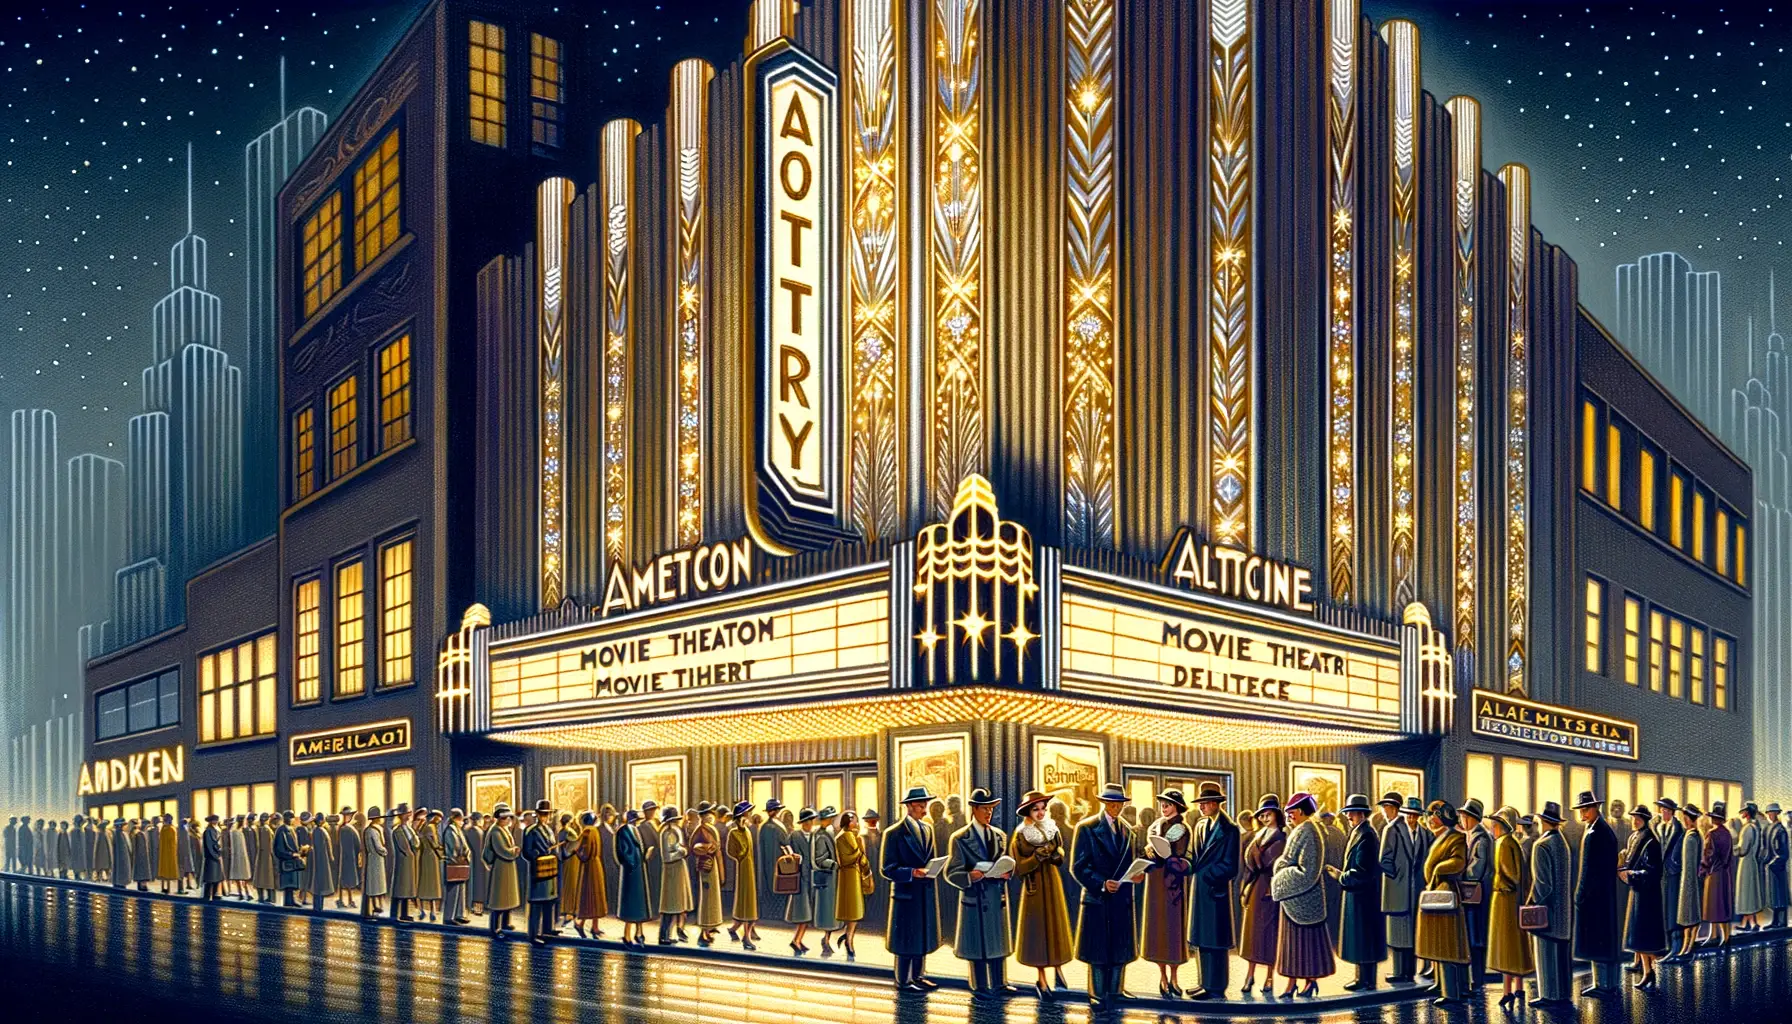 This is an image of an art deco theater with lots of people ready to go inside. It's exciting to look forward to a new movie, don't you think?